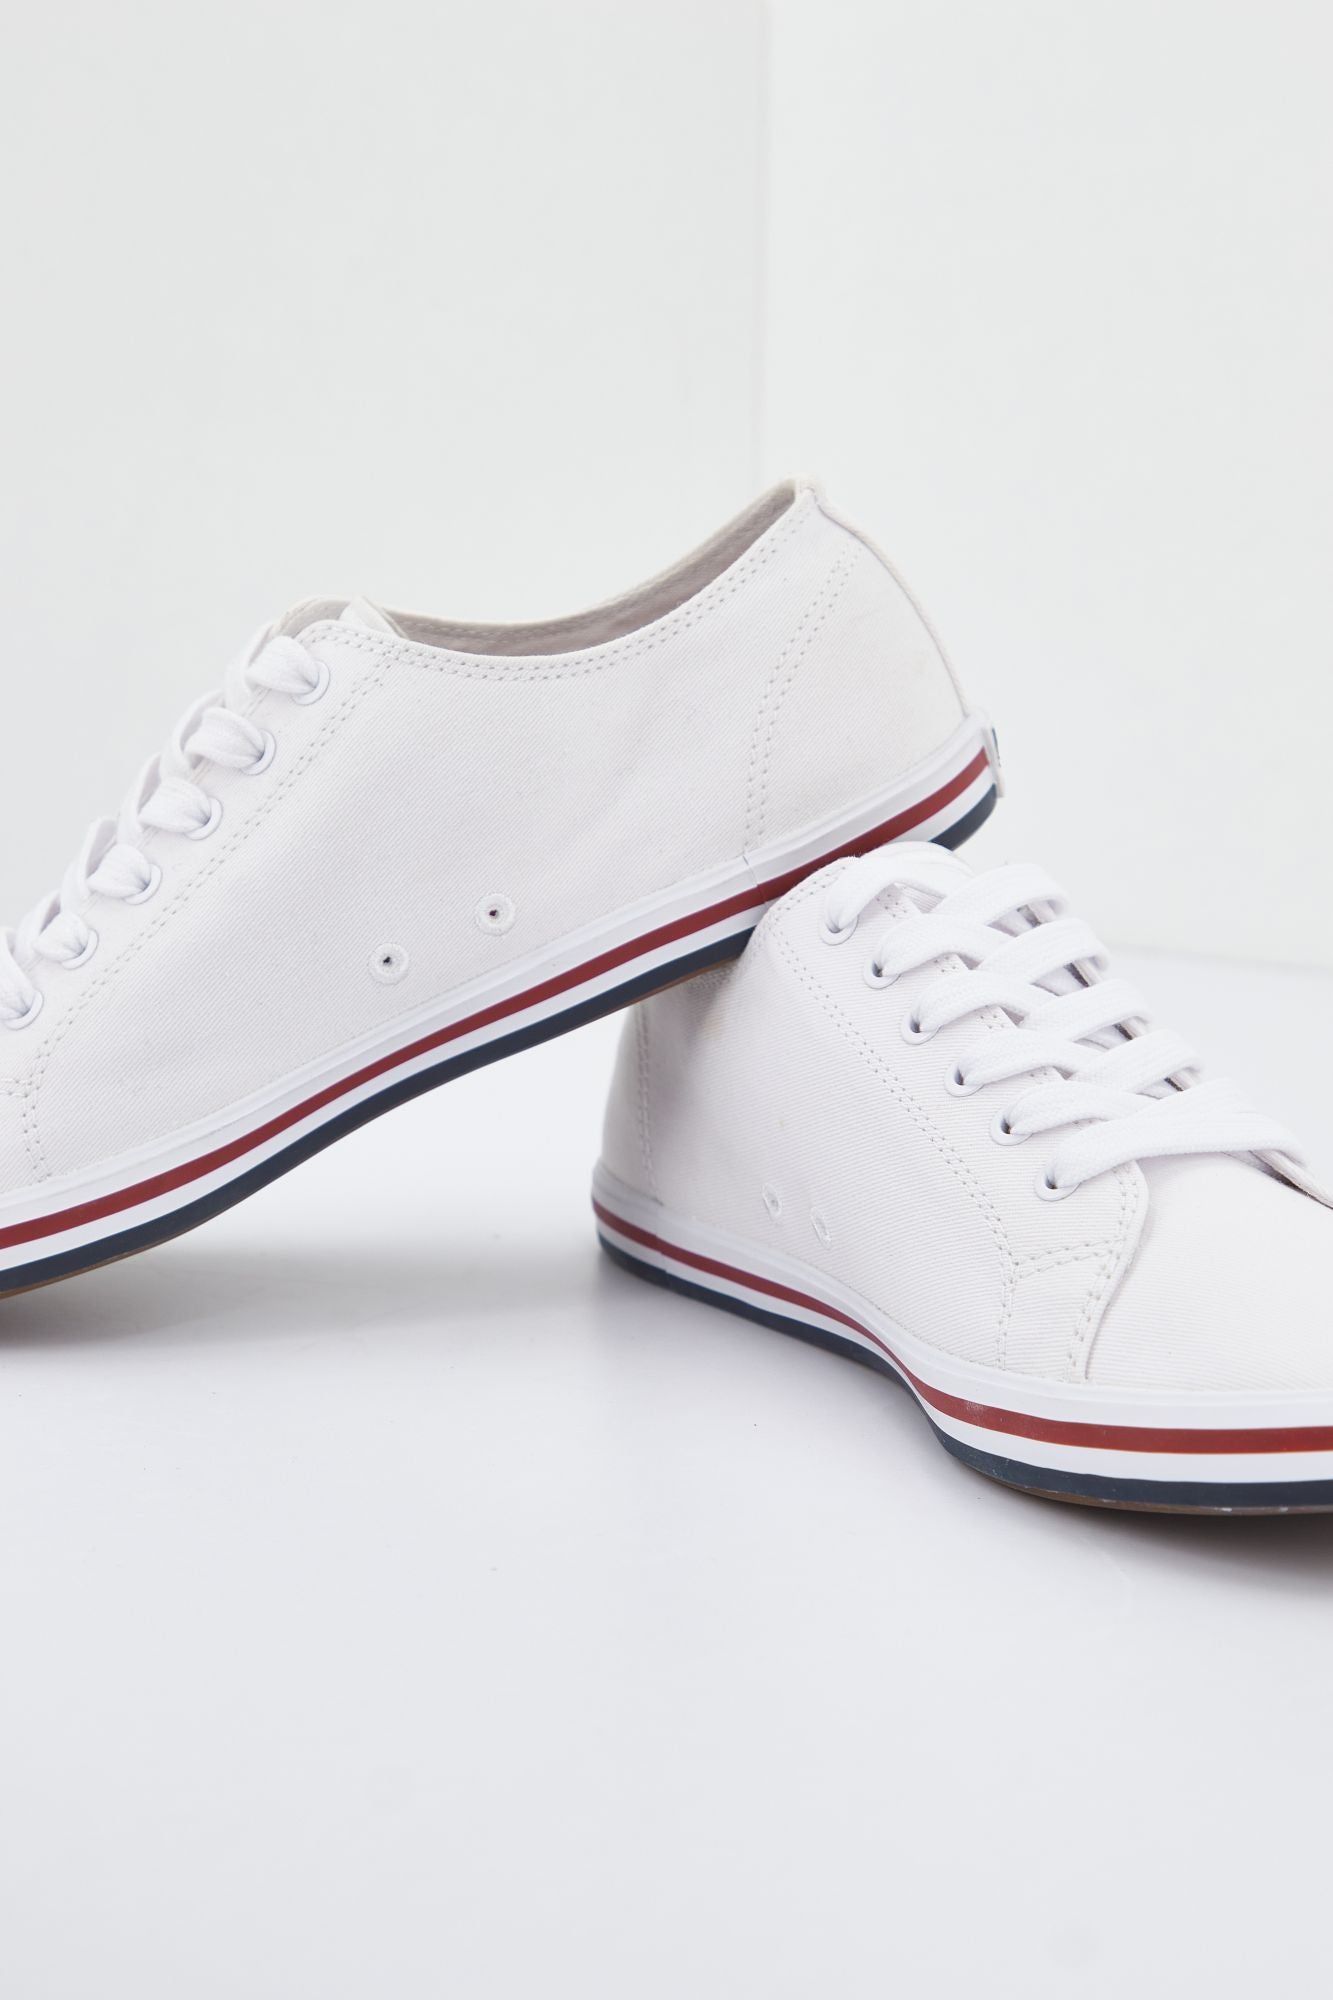 FRED PERRY KINGSTON TWILL en color BLANCO (2)